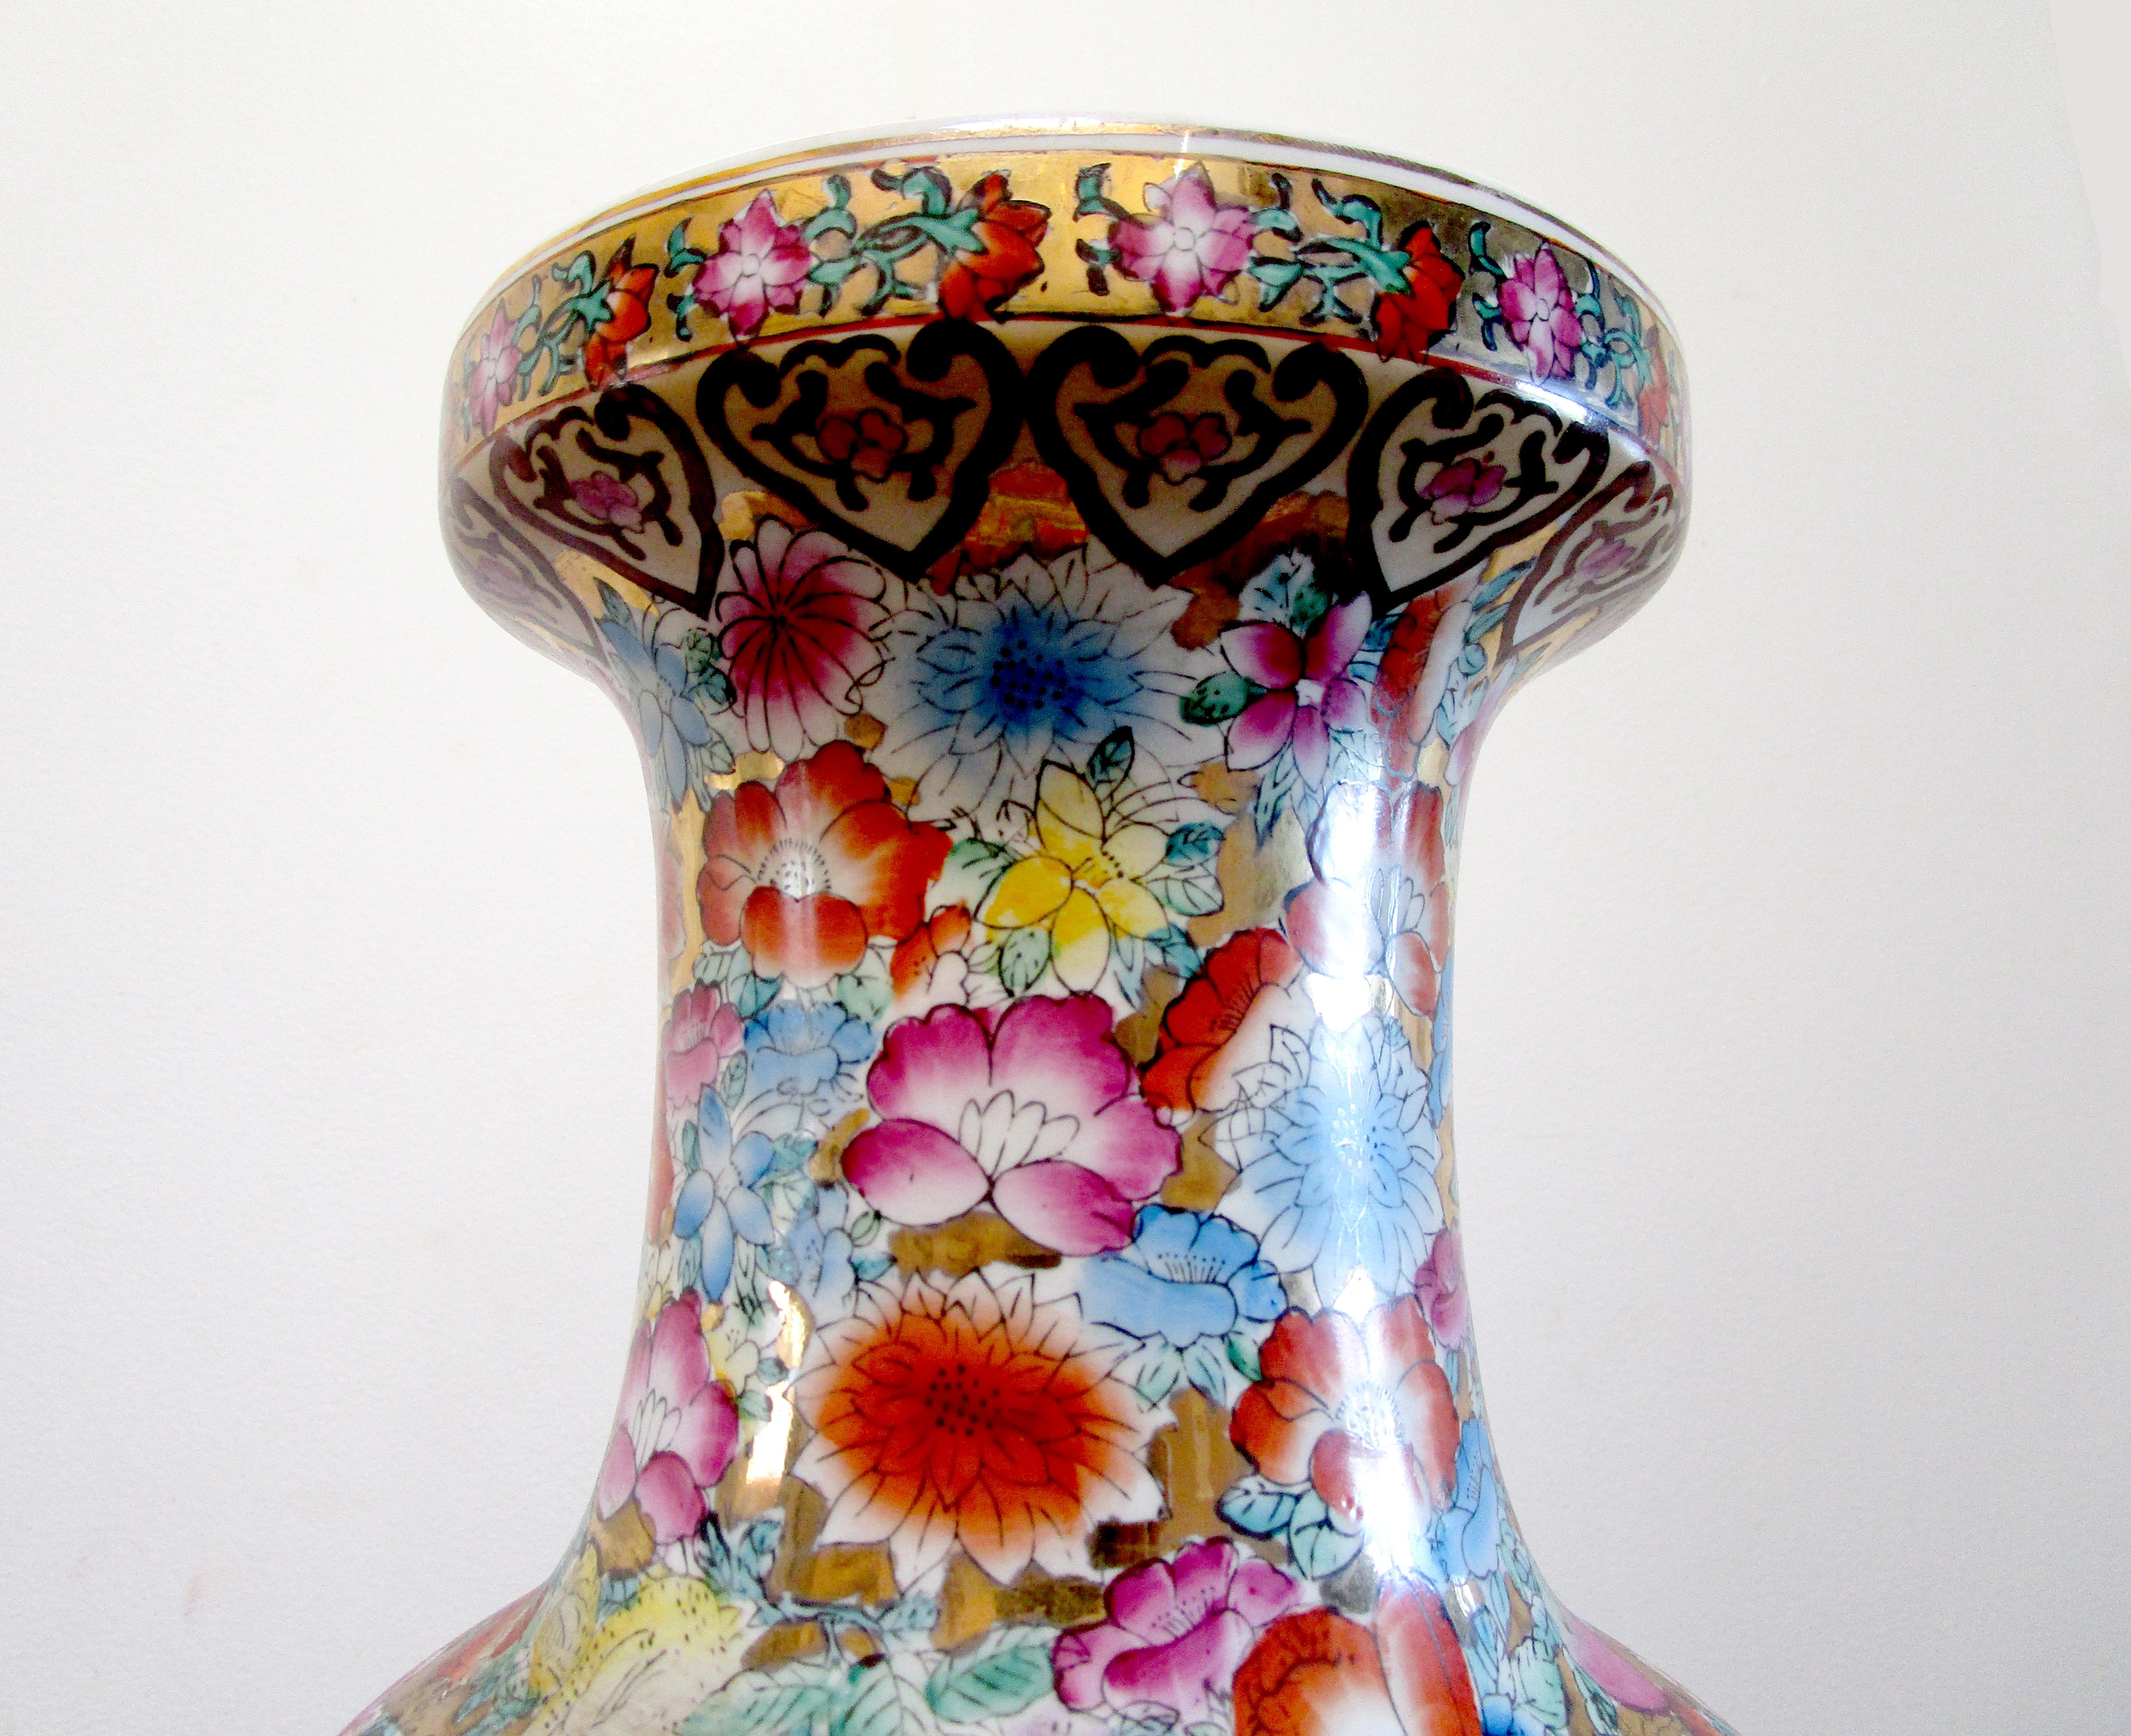 1920s Mille Fiori Chinese Export Parcel Gilt Monumental Rouleau Vase For Sale 6